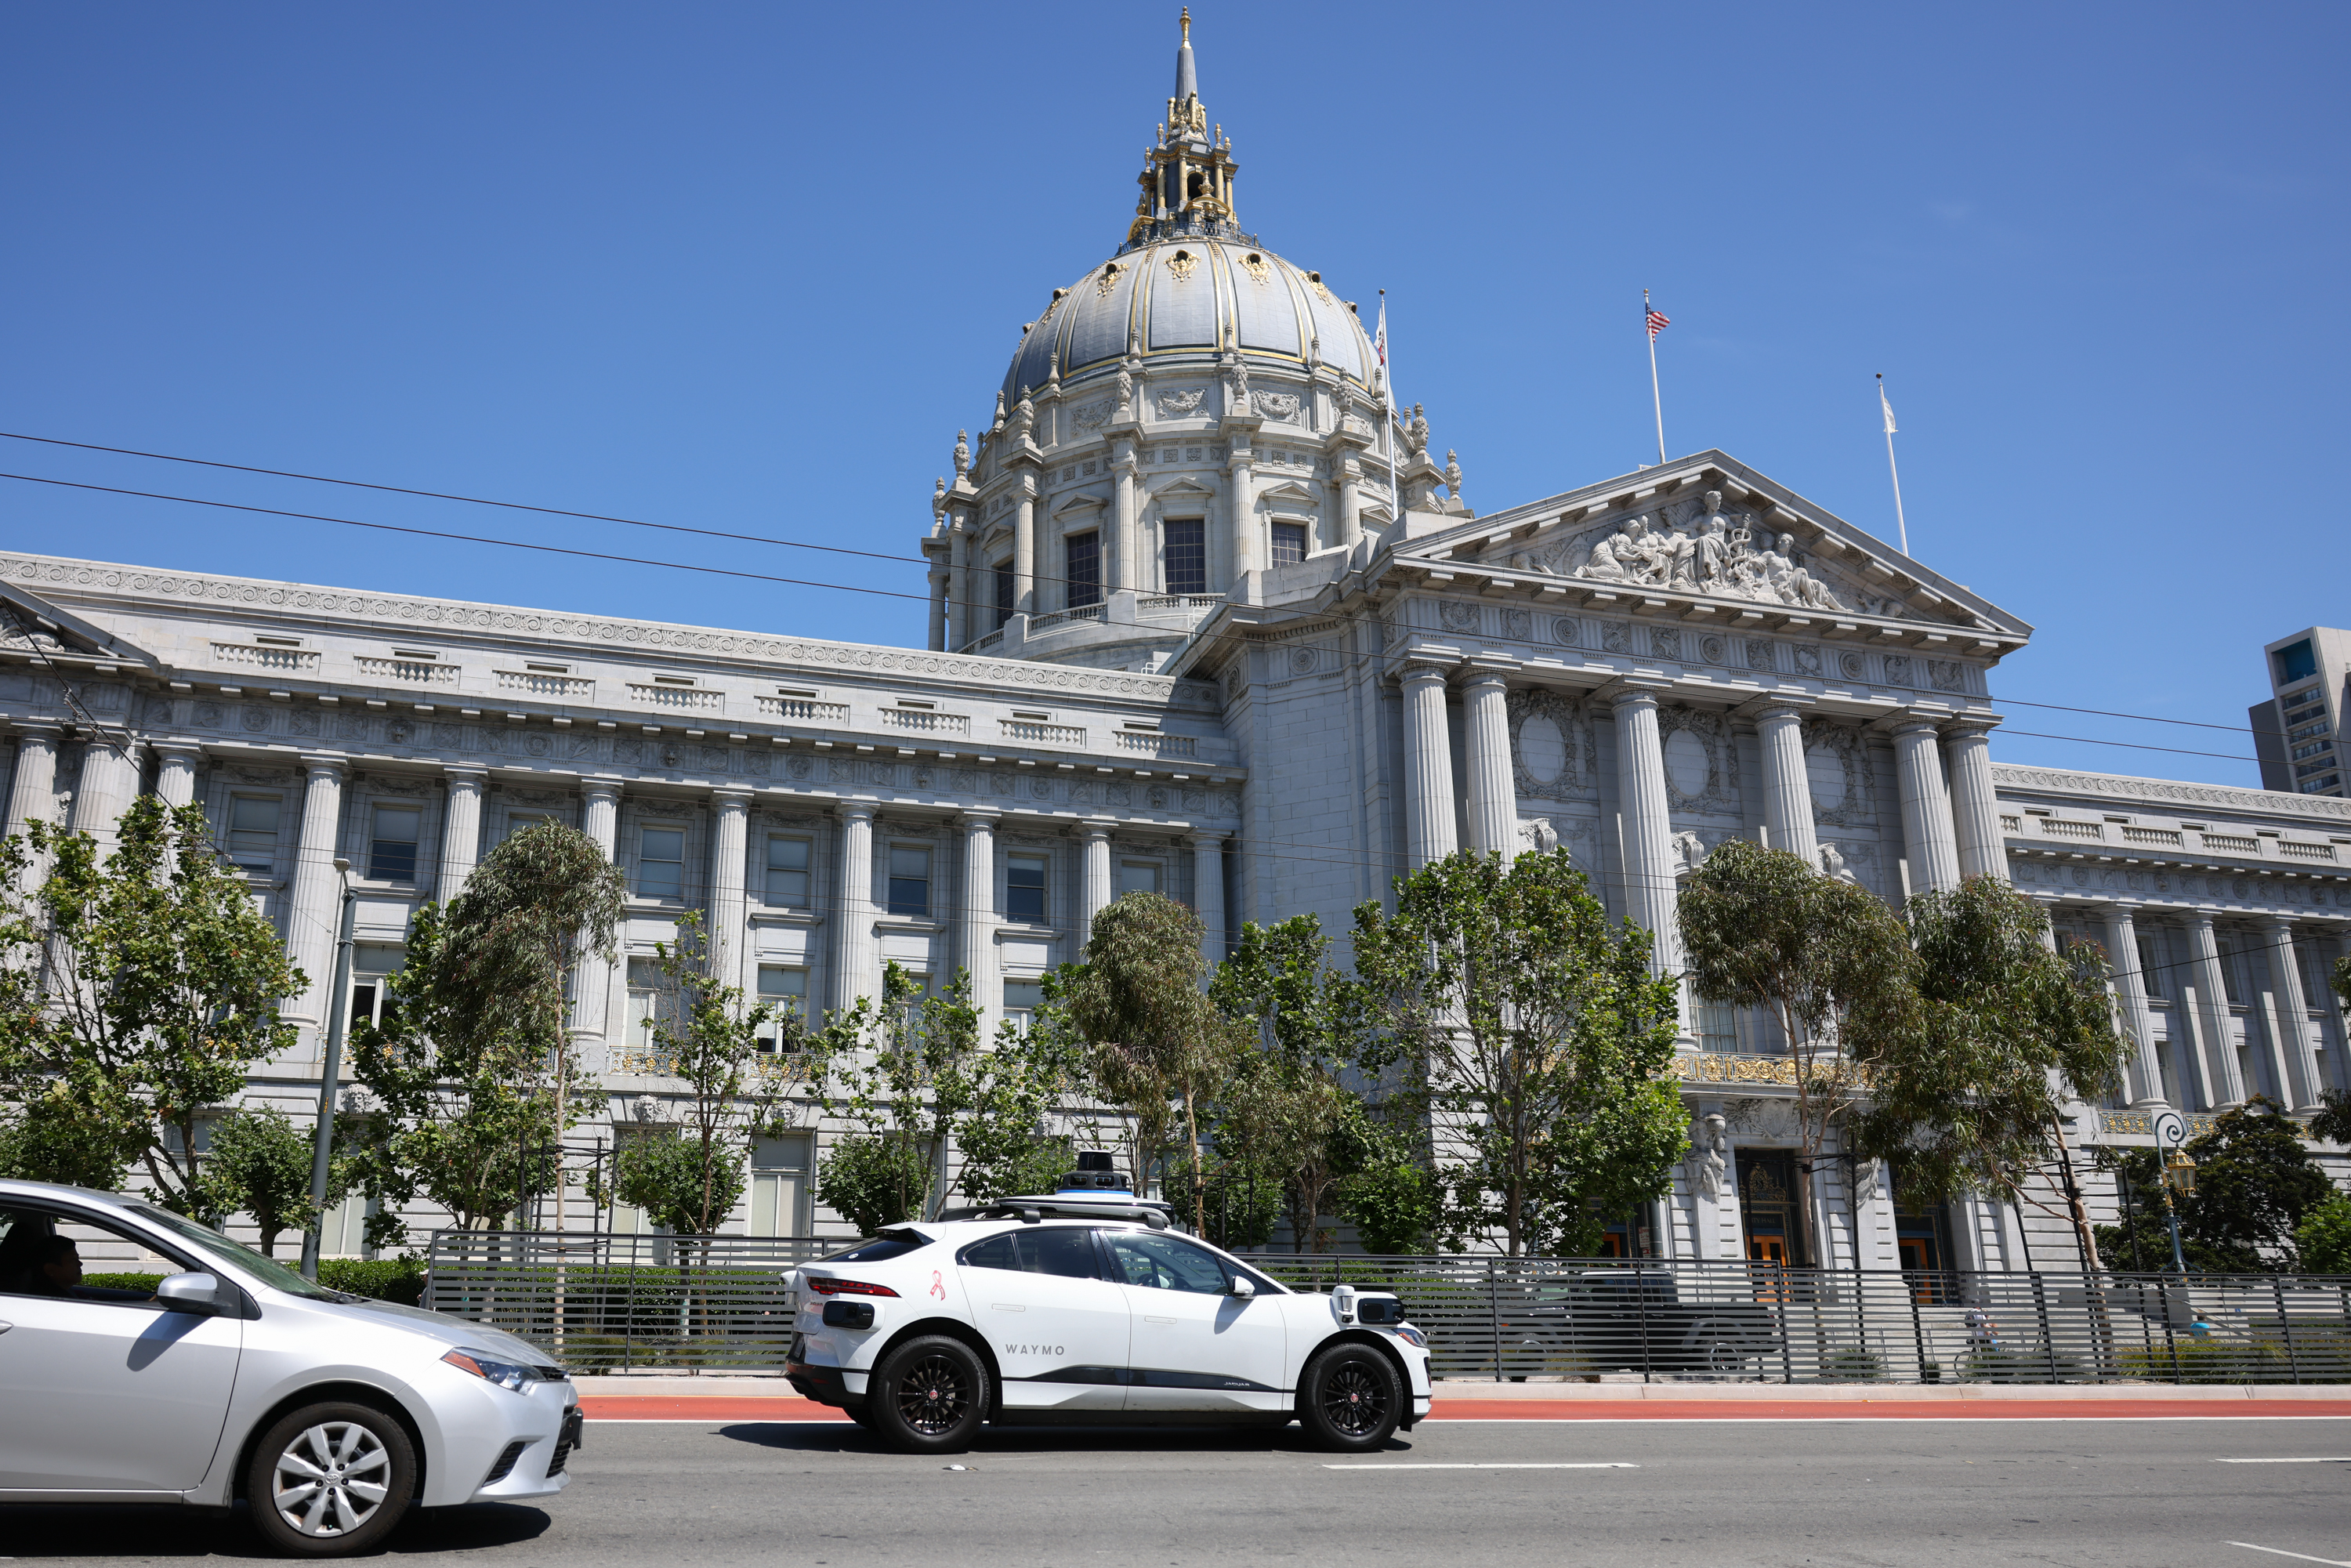 A Waymo is on the road in front of San Francisco City Hall. Another gray sedan is also visible on the left-bottom side of the photo